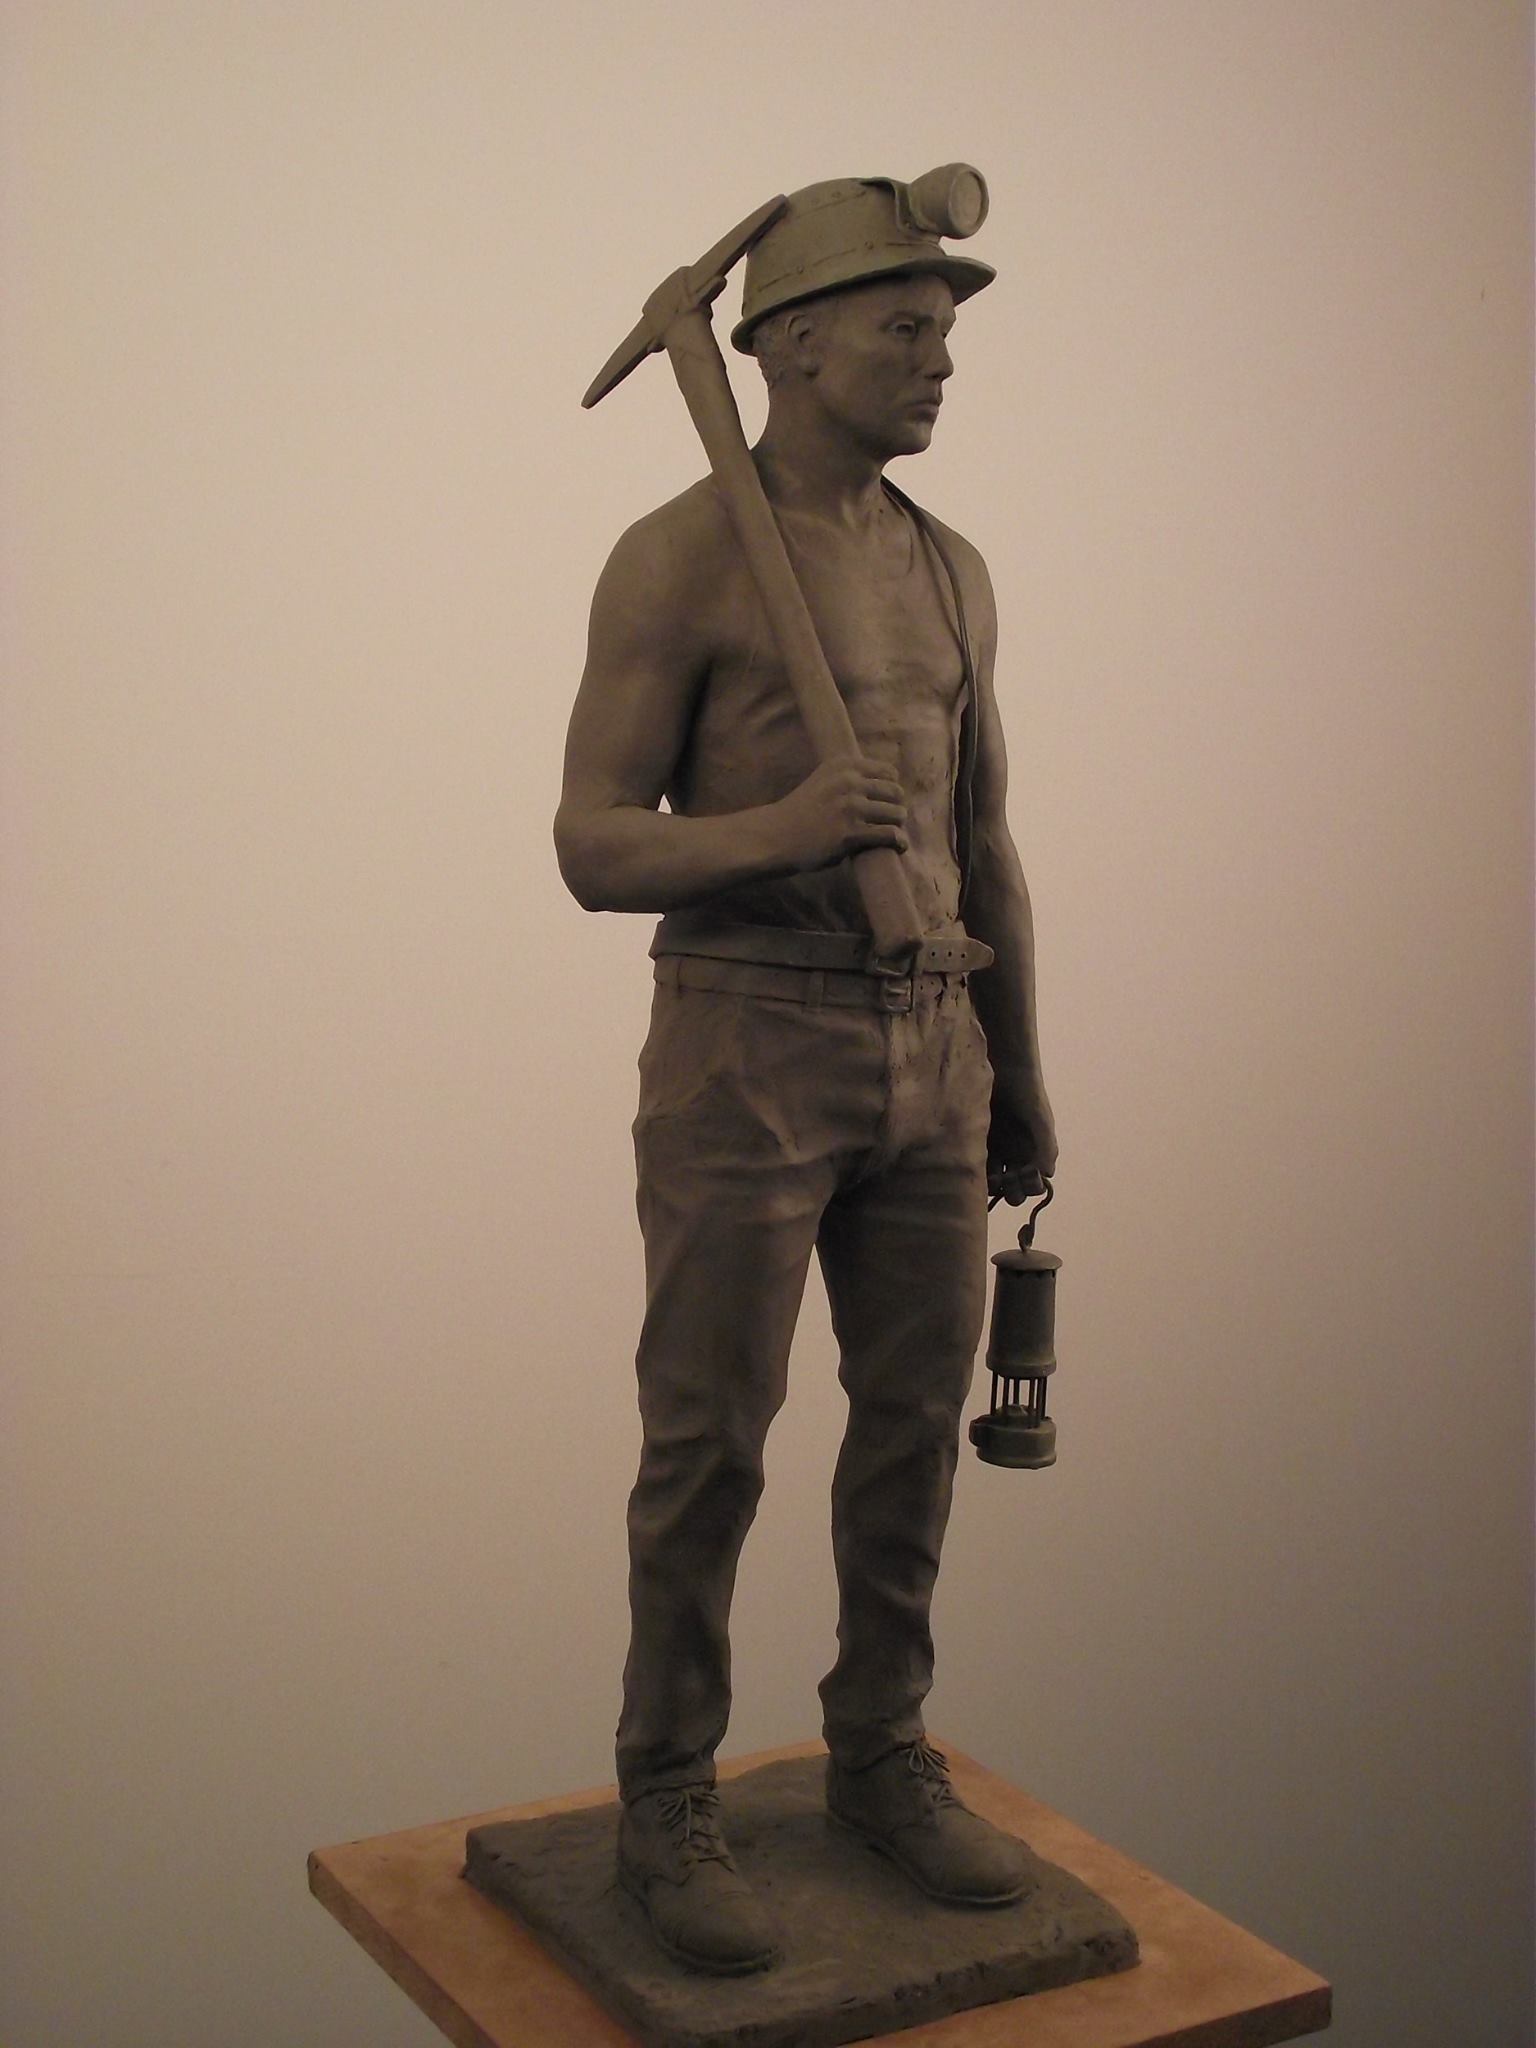 Image of statue of Ifton Colliery Miner